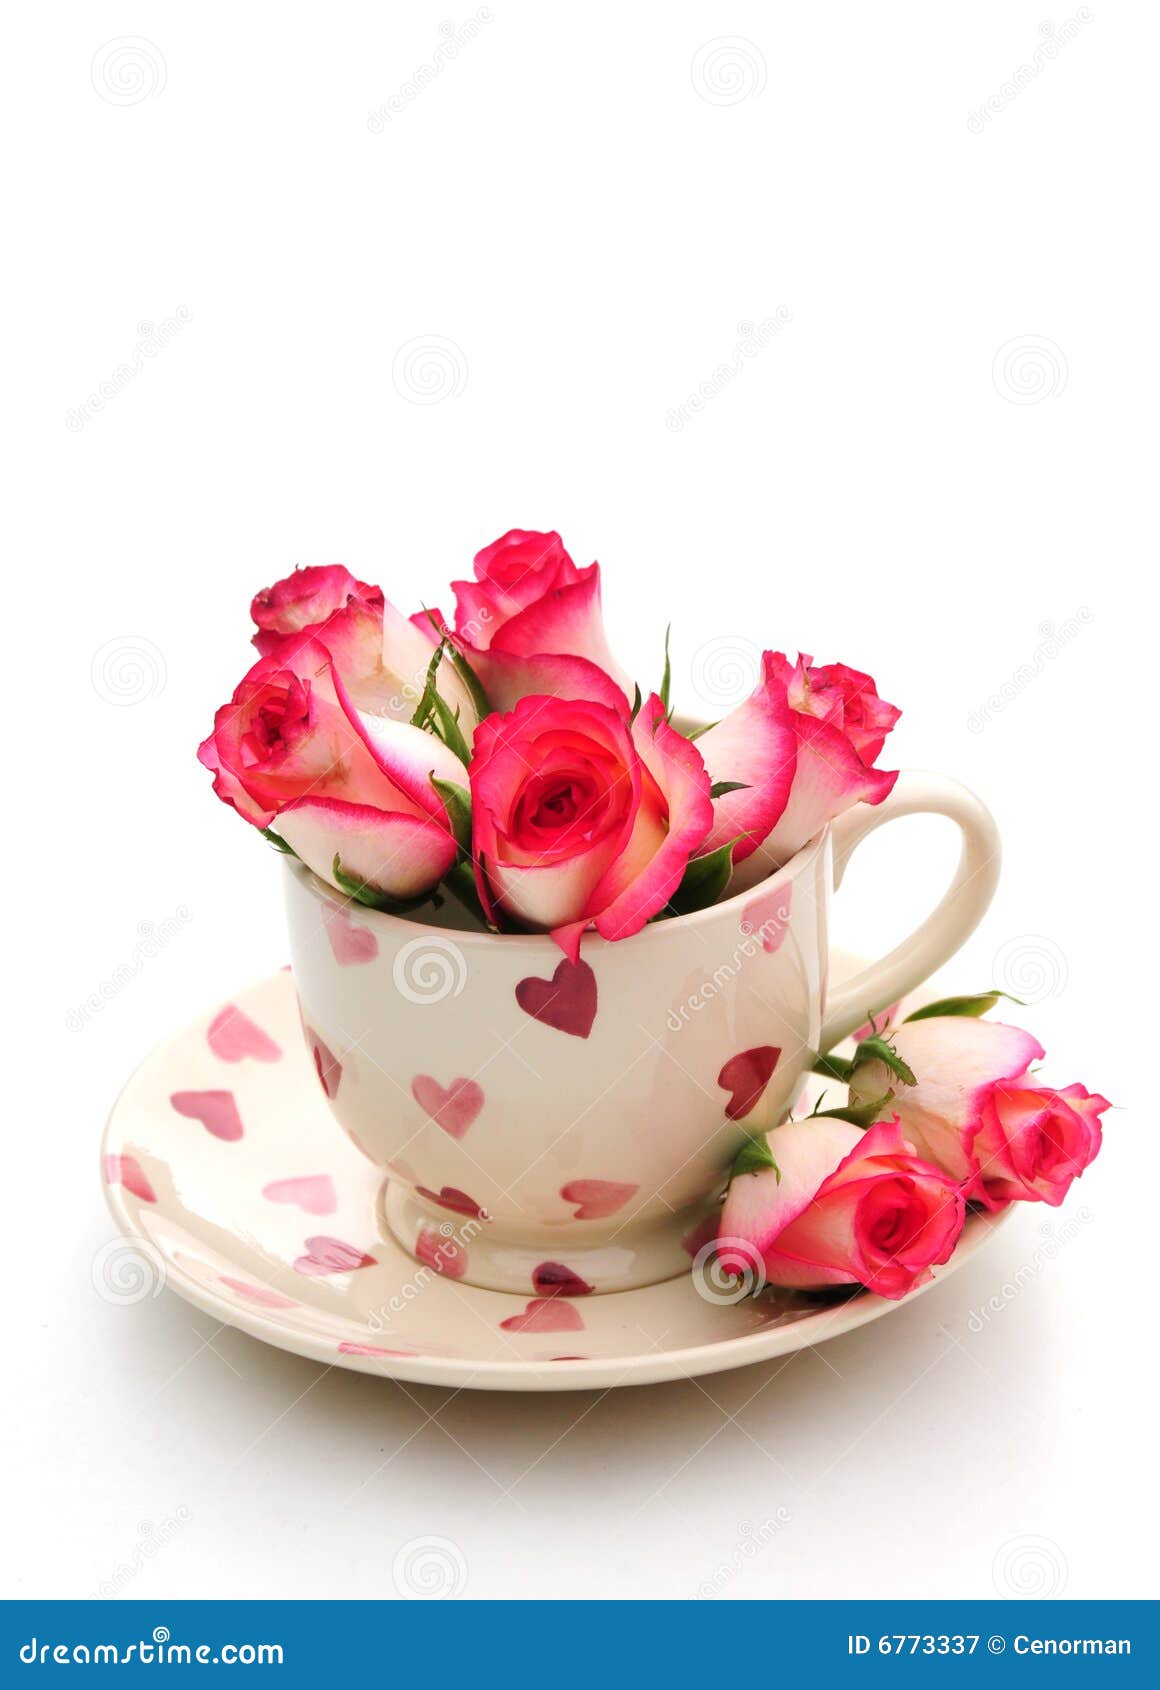 teacup with roses